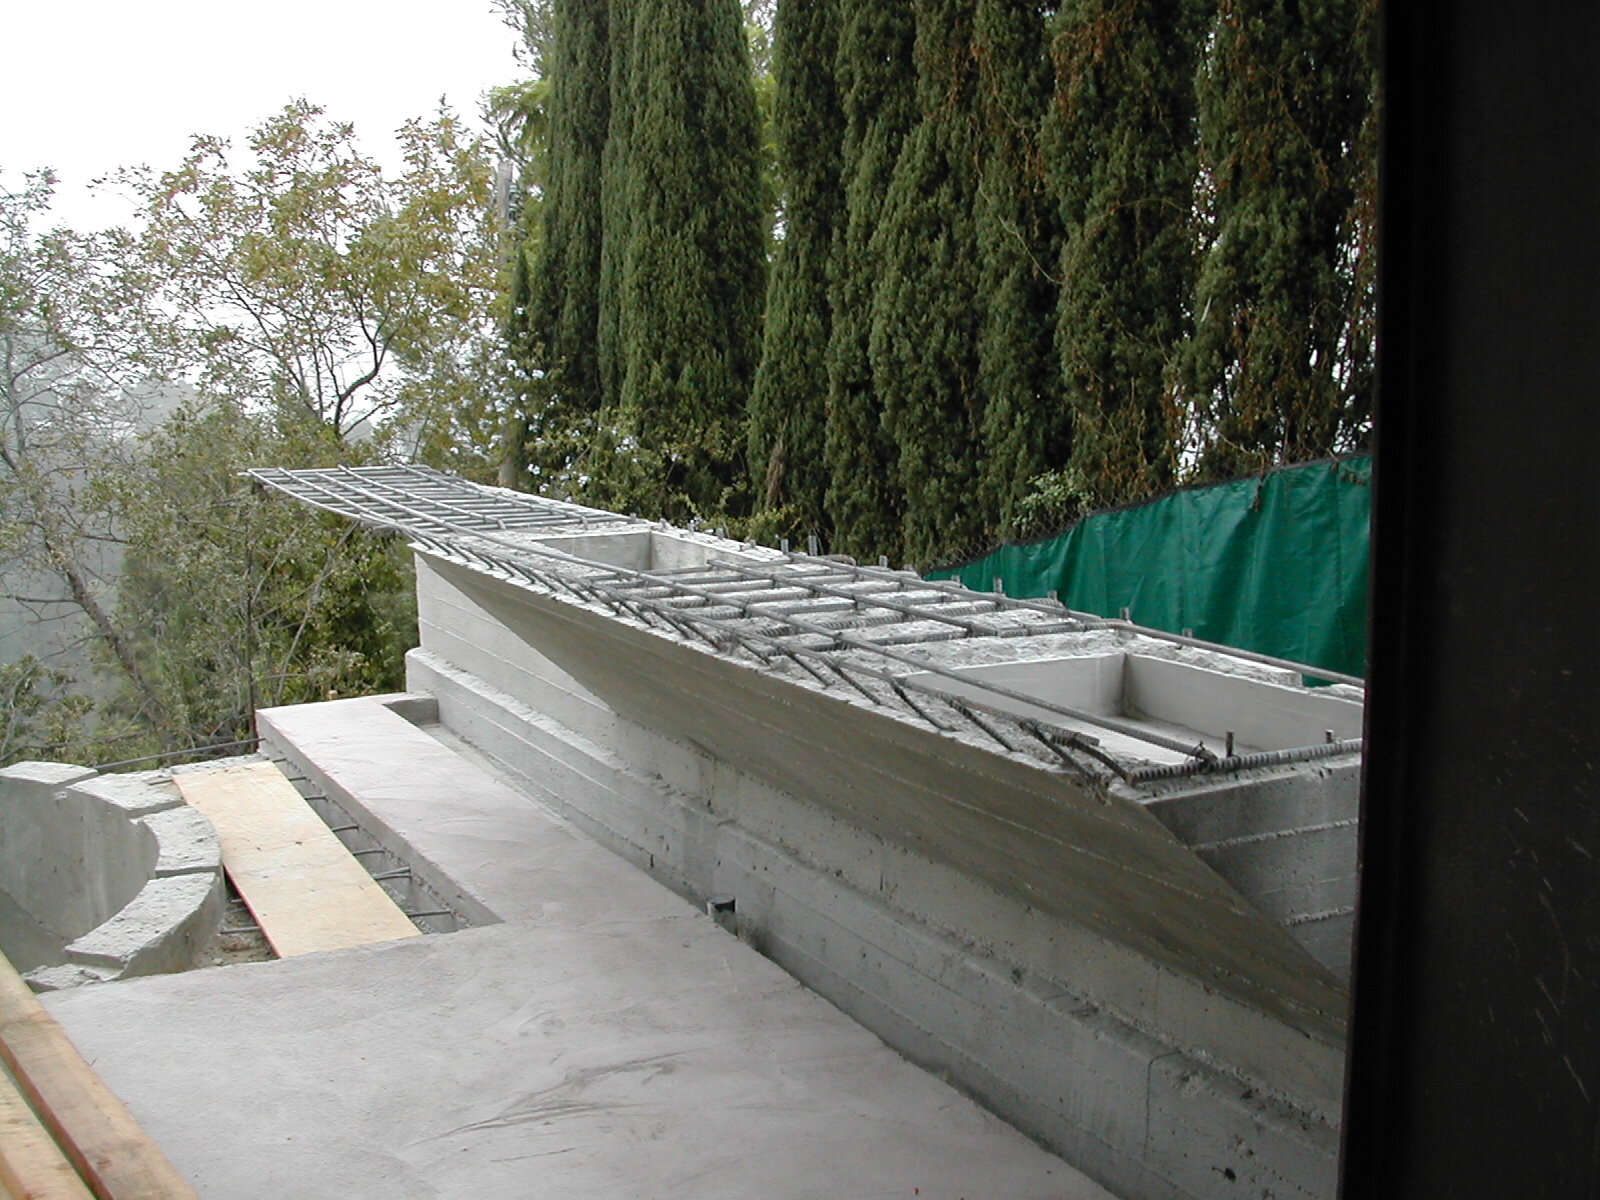  10.02.03 There were no structural drawings for this cantilevered shelf, which will eventually hold a sink and a barbecue. After pouring nearly seven hundred cubic yards of concrete for the foundations and walls, our subcontractor didn’t even need to